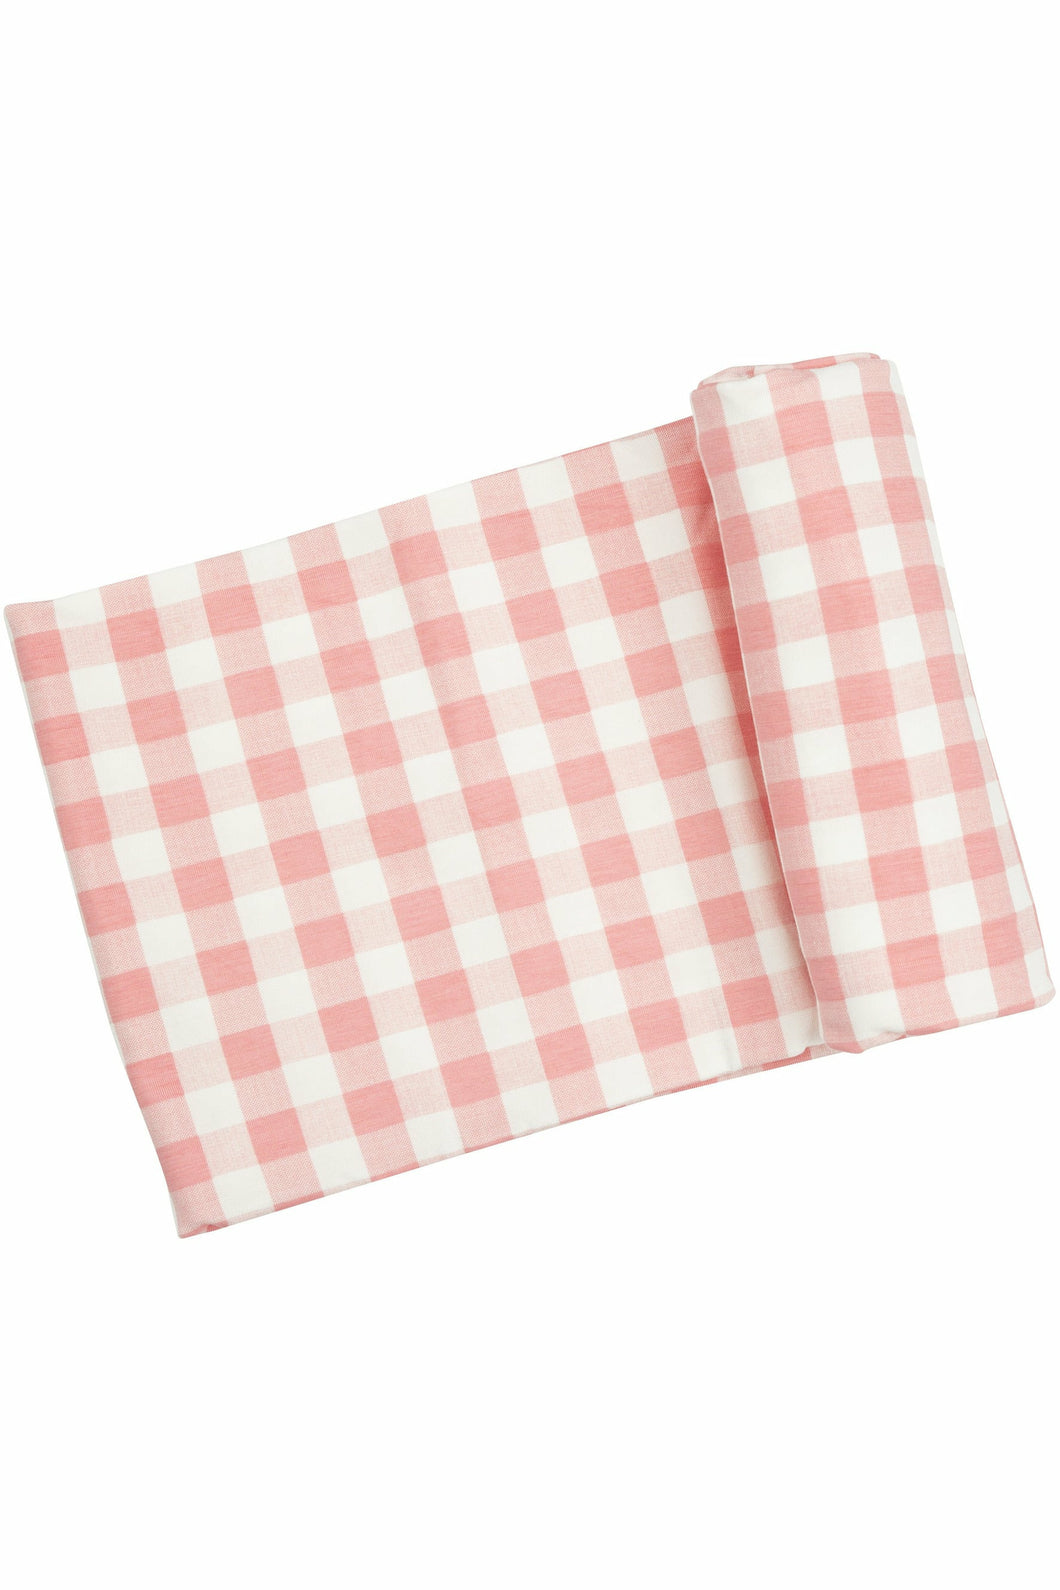 PINK GINGHAM SWADDLE